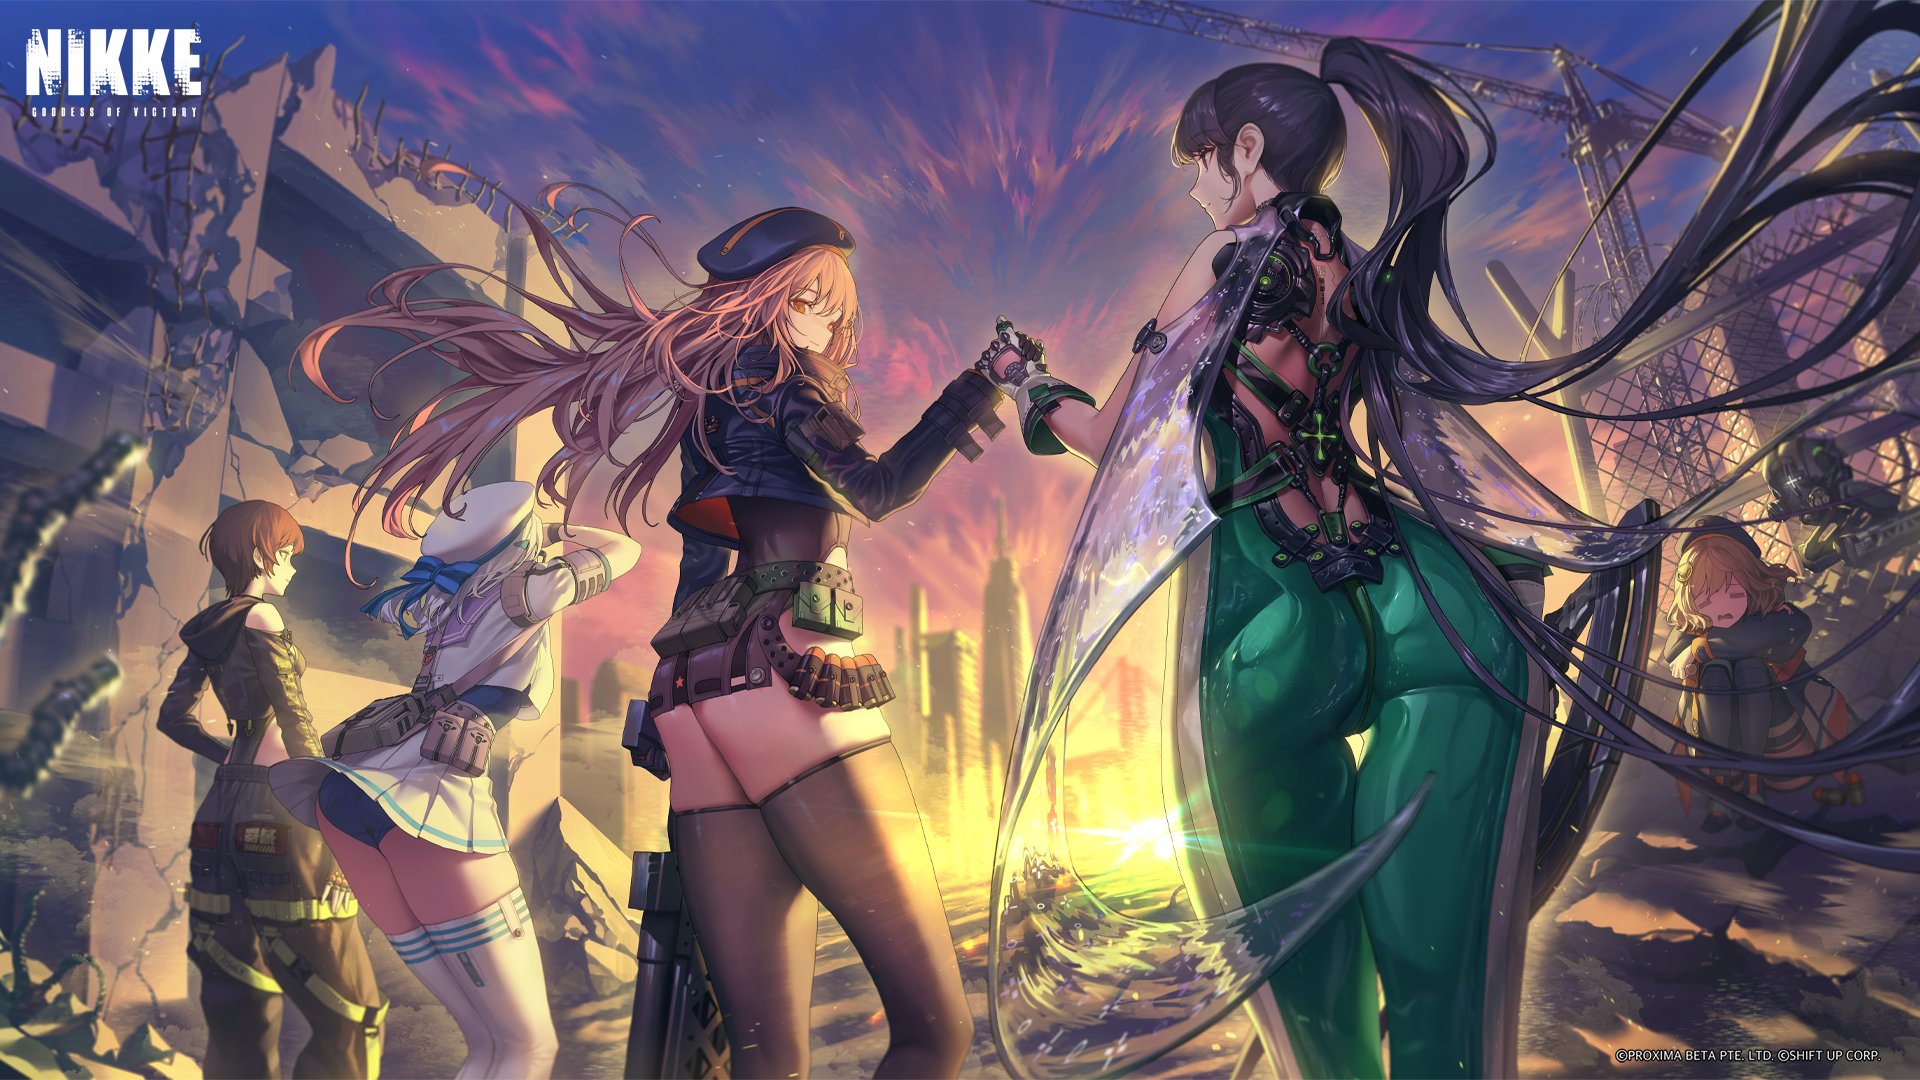 Anime 1920x1080 Nikke: The Goddess of Victory Stellar Blade crossover Eve (Stellar Blade) berets Neon (Nikke) sunset glow Lily (Stellar Blade) building Anis (Nikke: The Goddess of Victory) Rapi (Nikke: The Goddess of Victory) women outdoors weapon group of women ponytail ammunition pantsu shot ruins black thigh-highs looking at viewer truss looking back bodysuit long hair long sleeves watermarked drone ass thighs hat holding hands hoods gun sky sunset cranes (machine) gloves